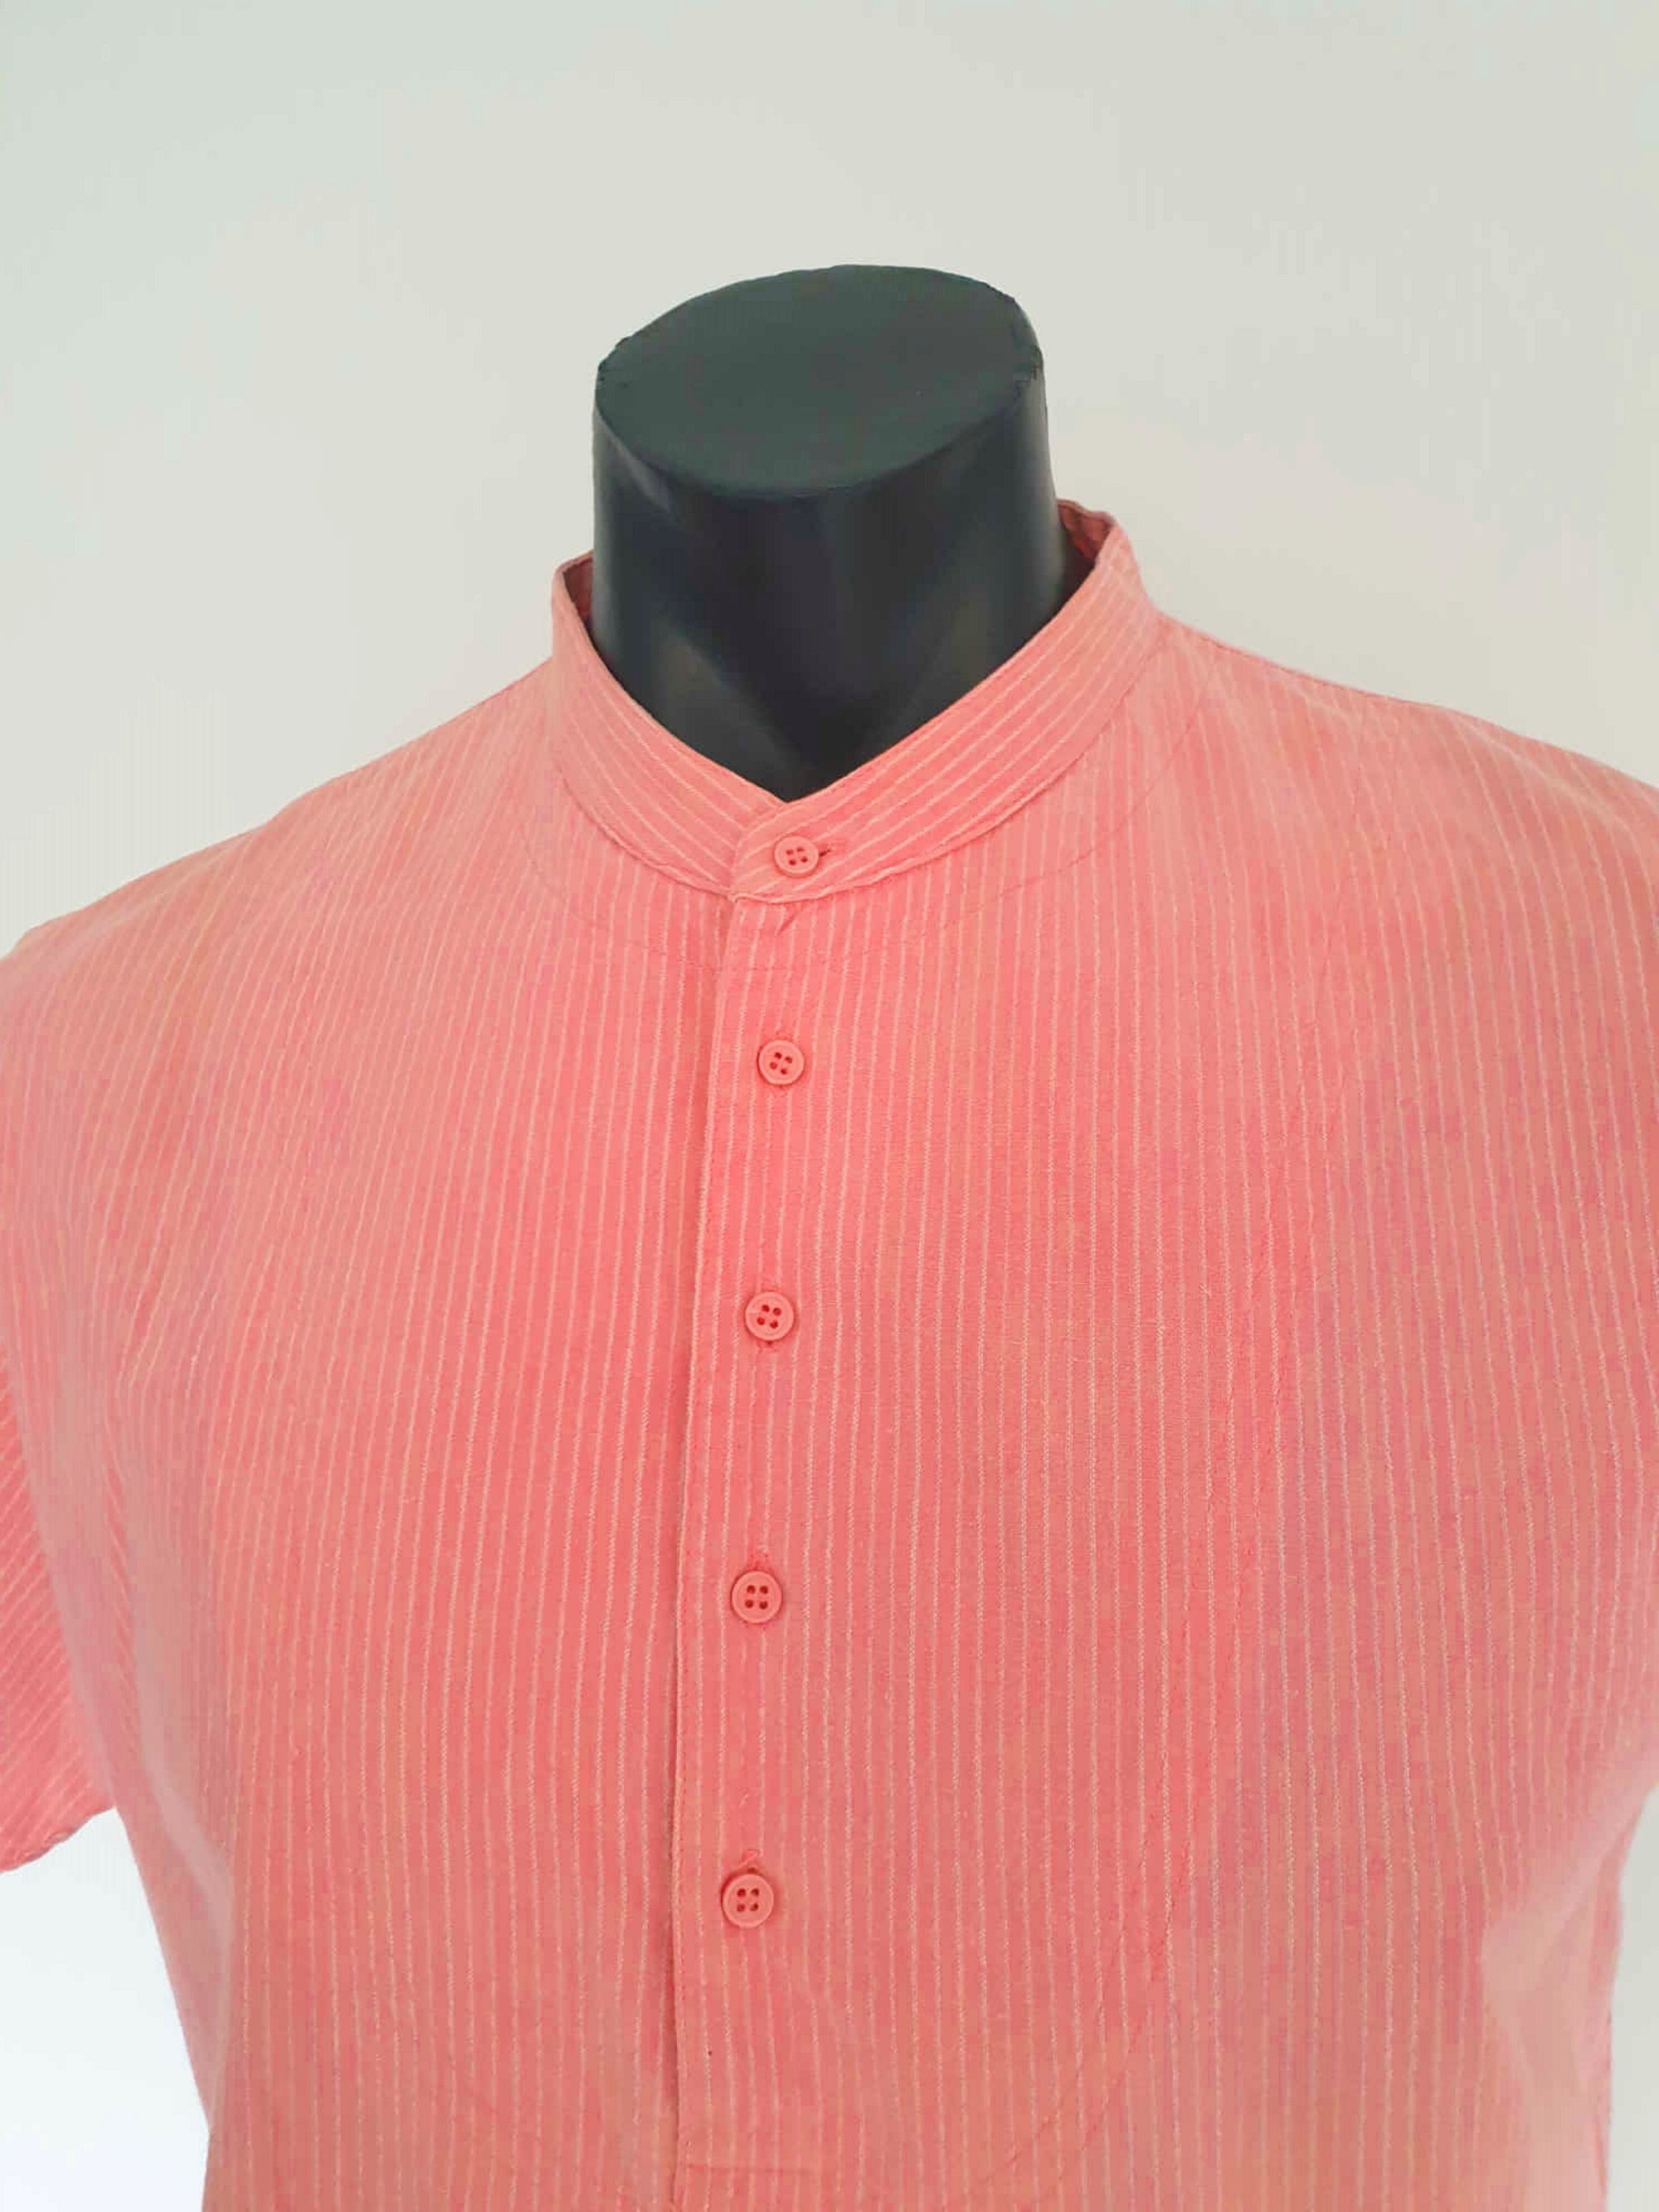 1980s vintage pink pull on shirt with band neck by JP compagno